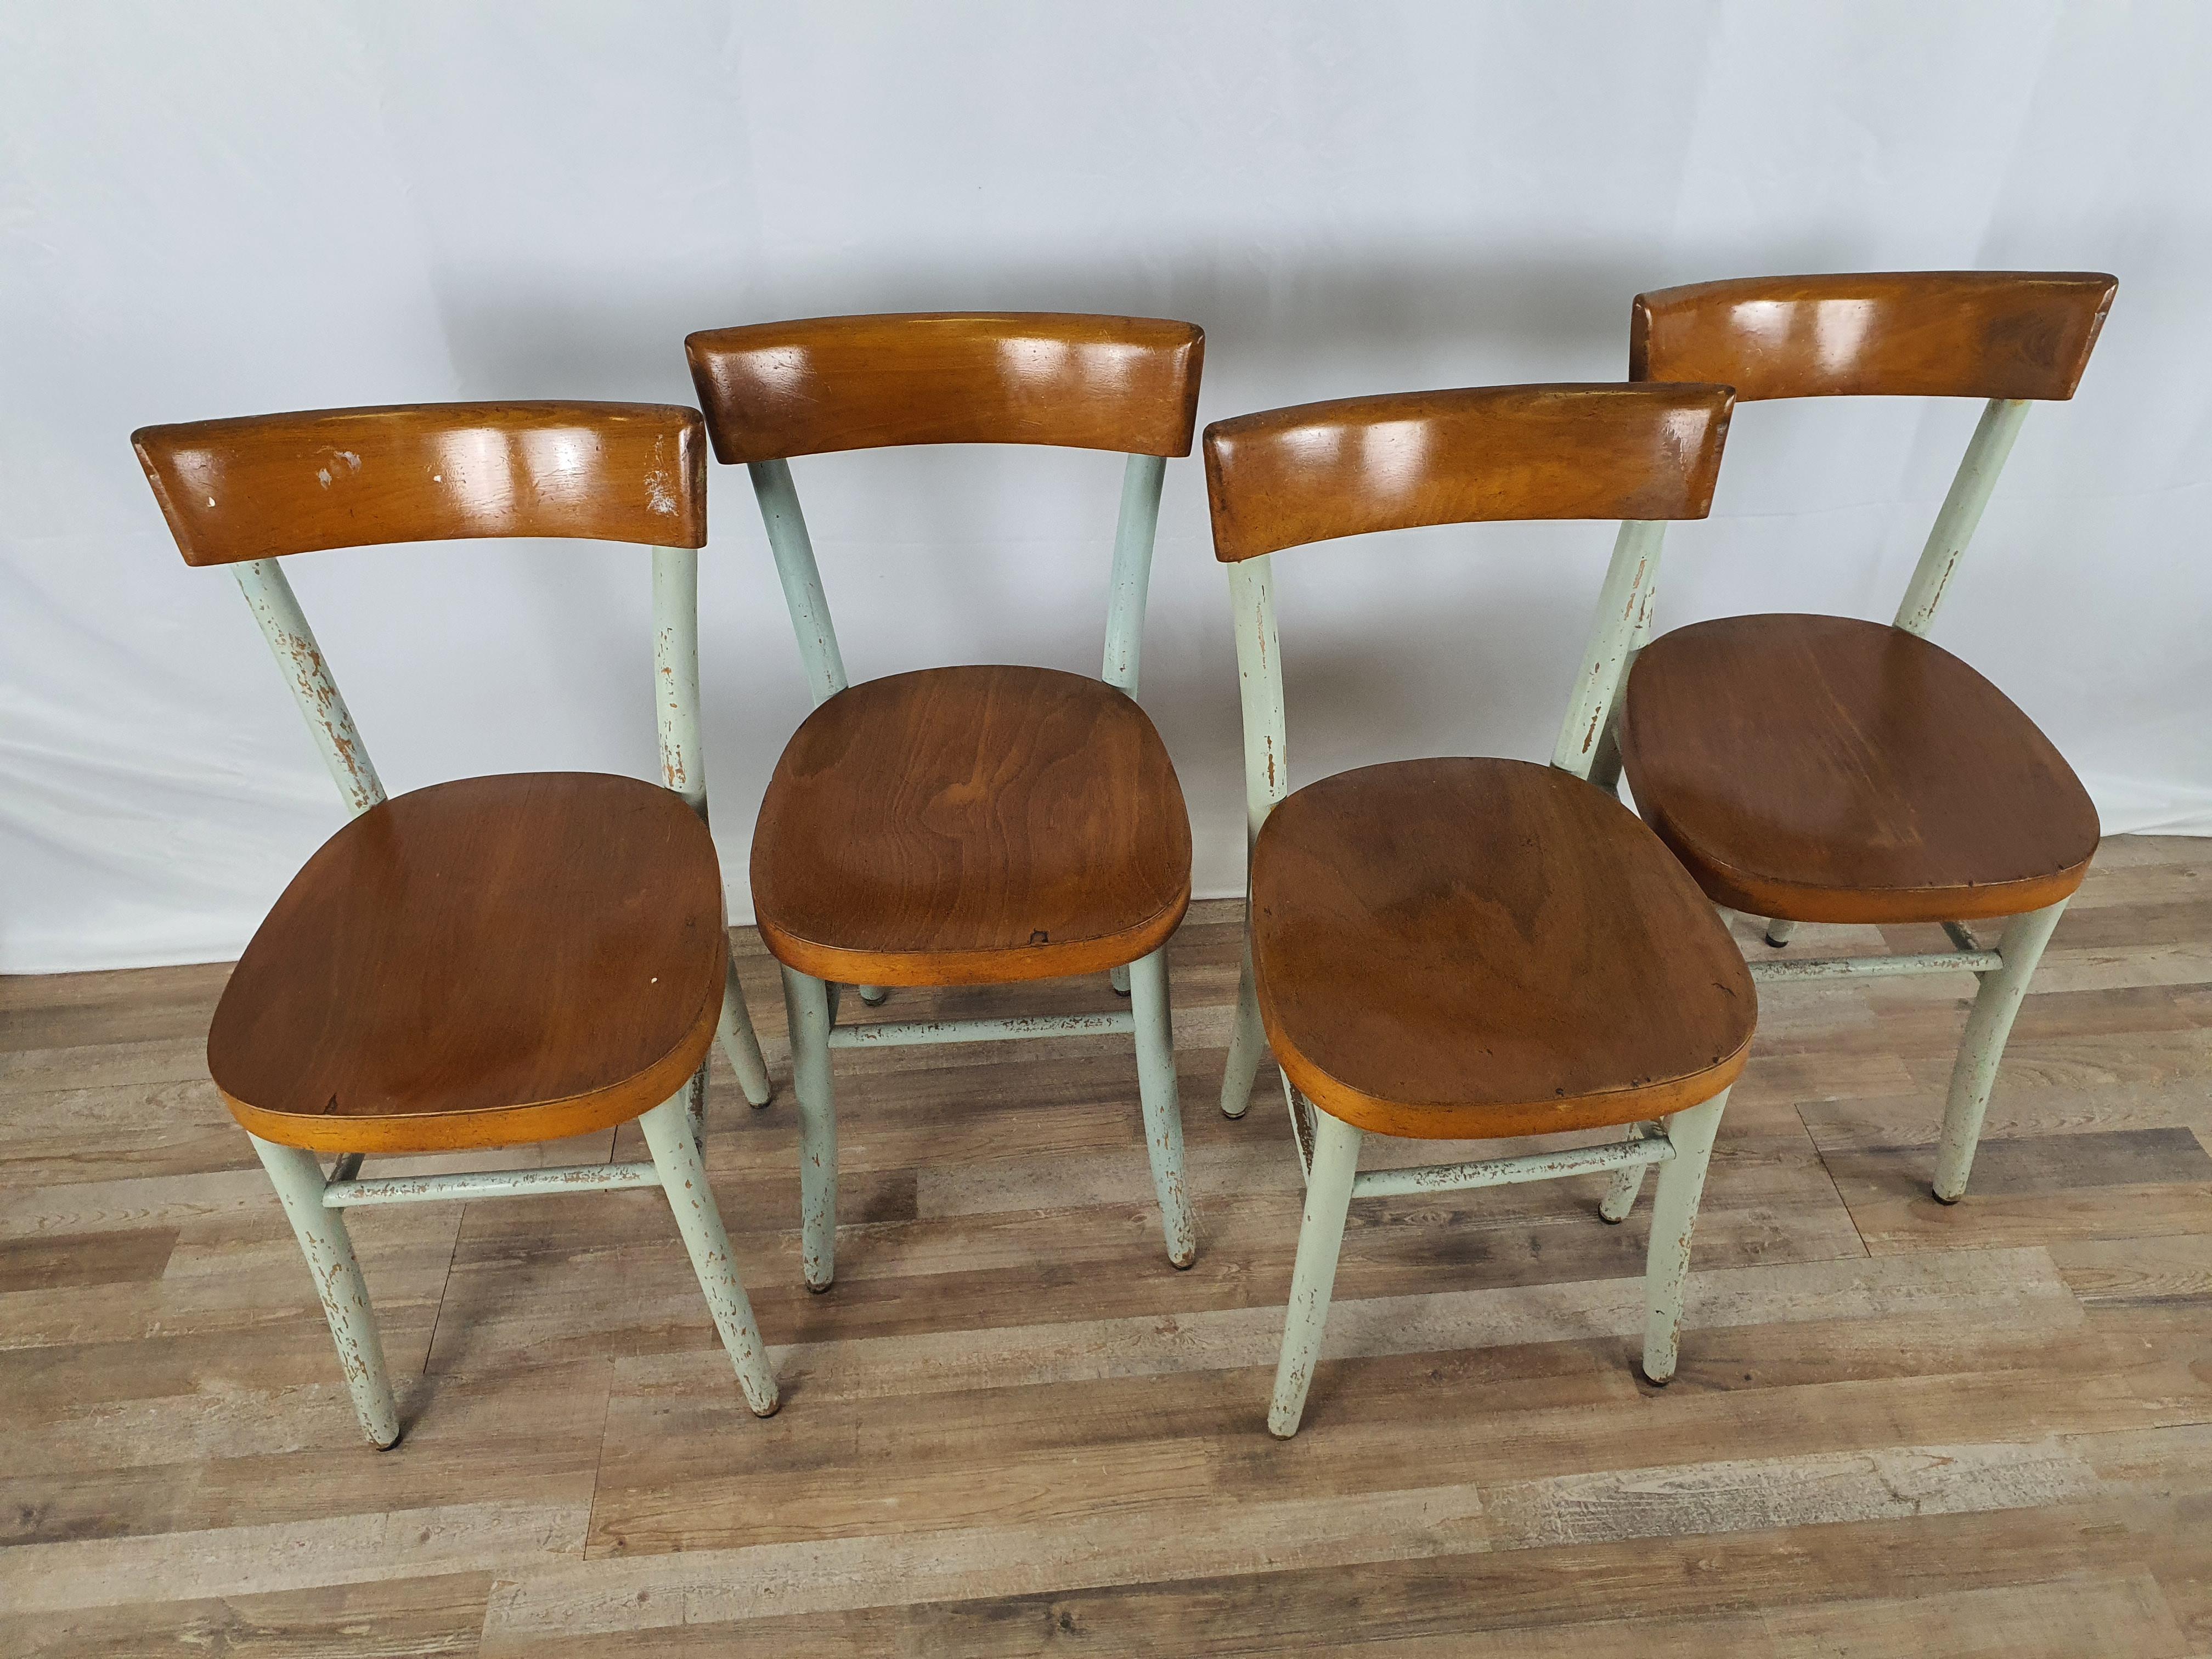 Set of four 1950s beech chairs, conceived and designed for rustic environments such as taverns, bistros, country houses or Vintage-style venues.

Very elegant and with a modern design, they come with backrests and seats in a natural color and the